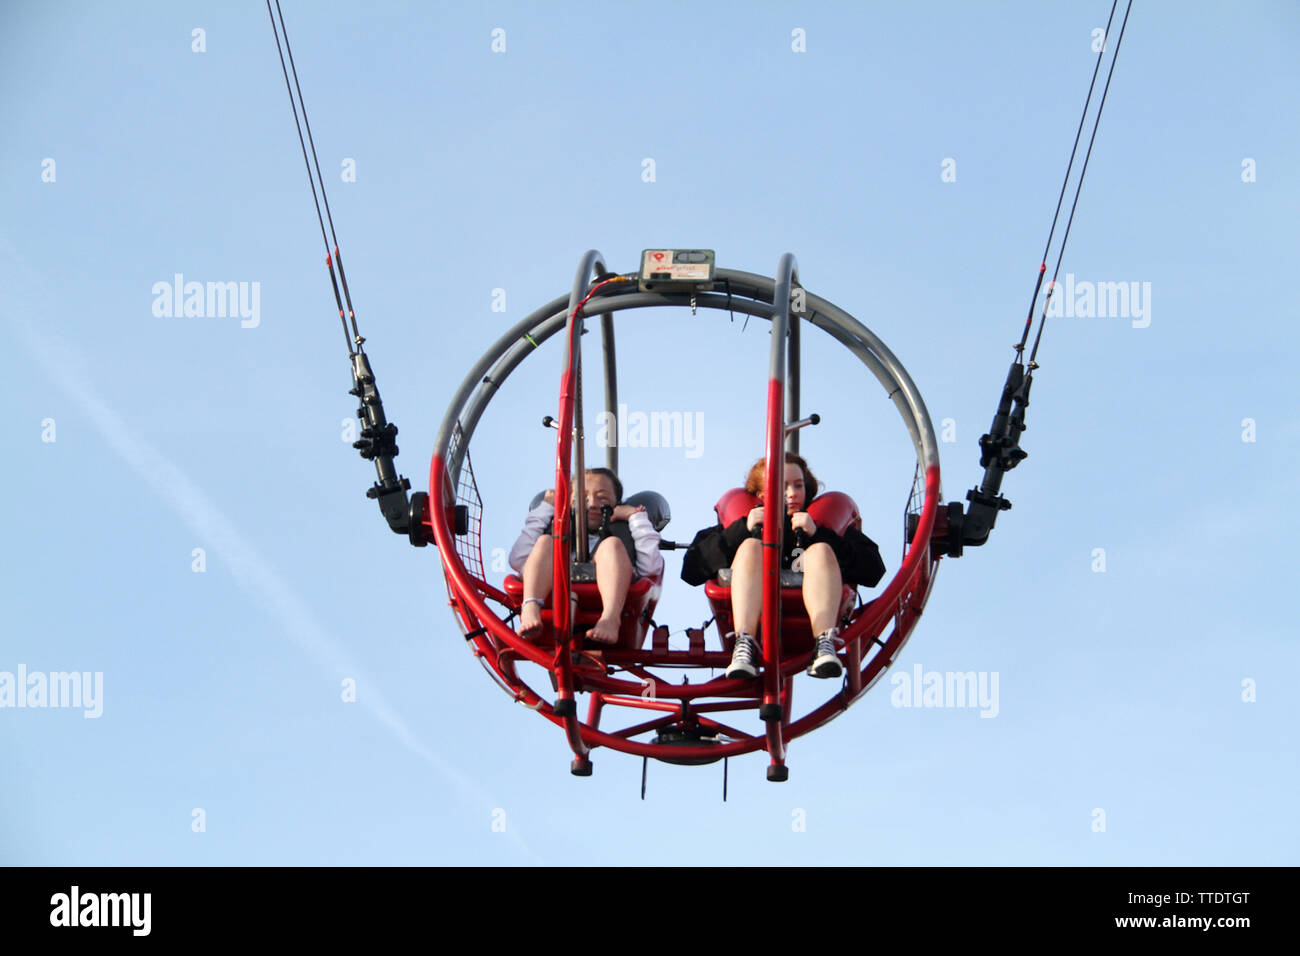 People riding the Slingshot in amusement park Stock Photo - Alamy